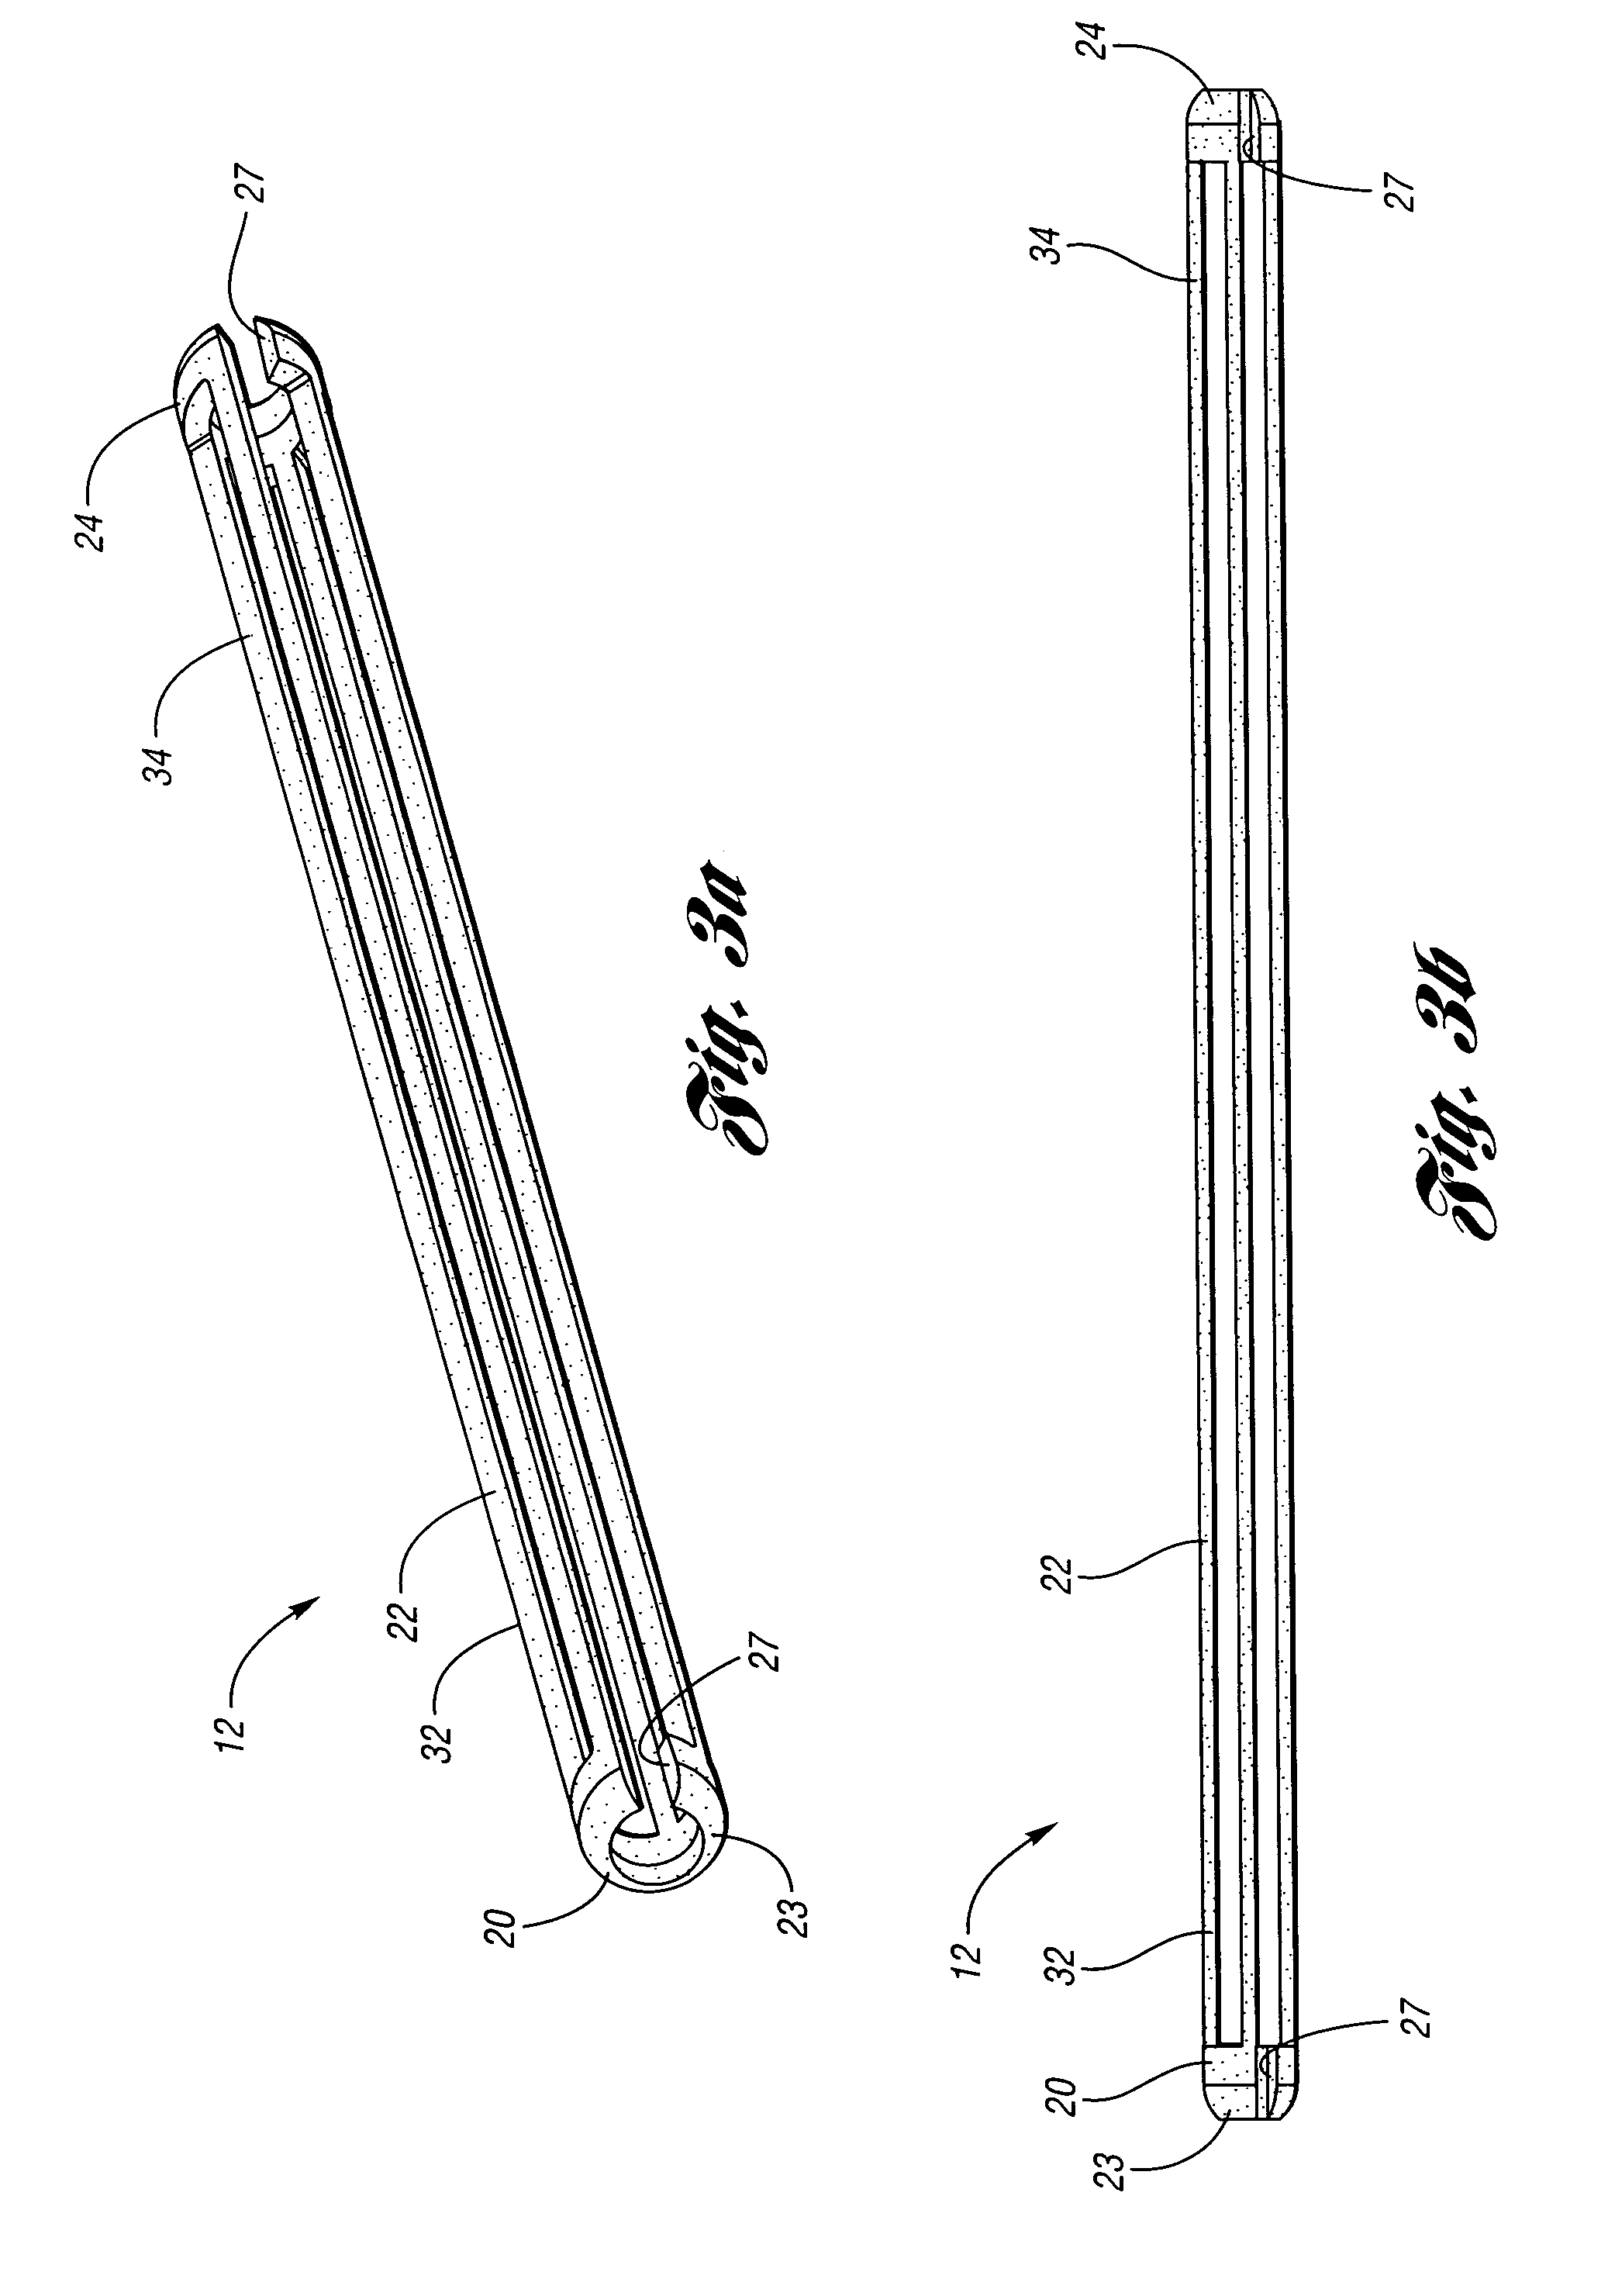 Angioplasty cutting device and method for treating a stenotic lesion in a body vessel